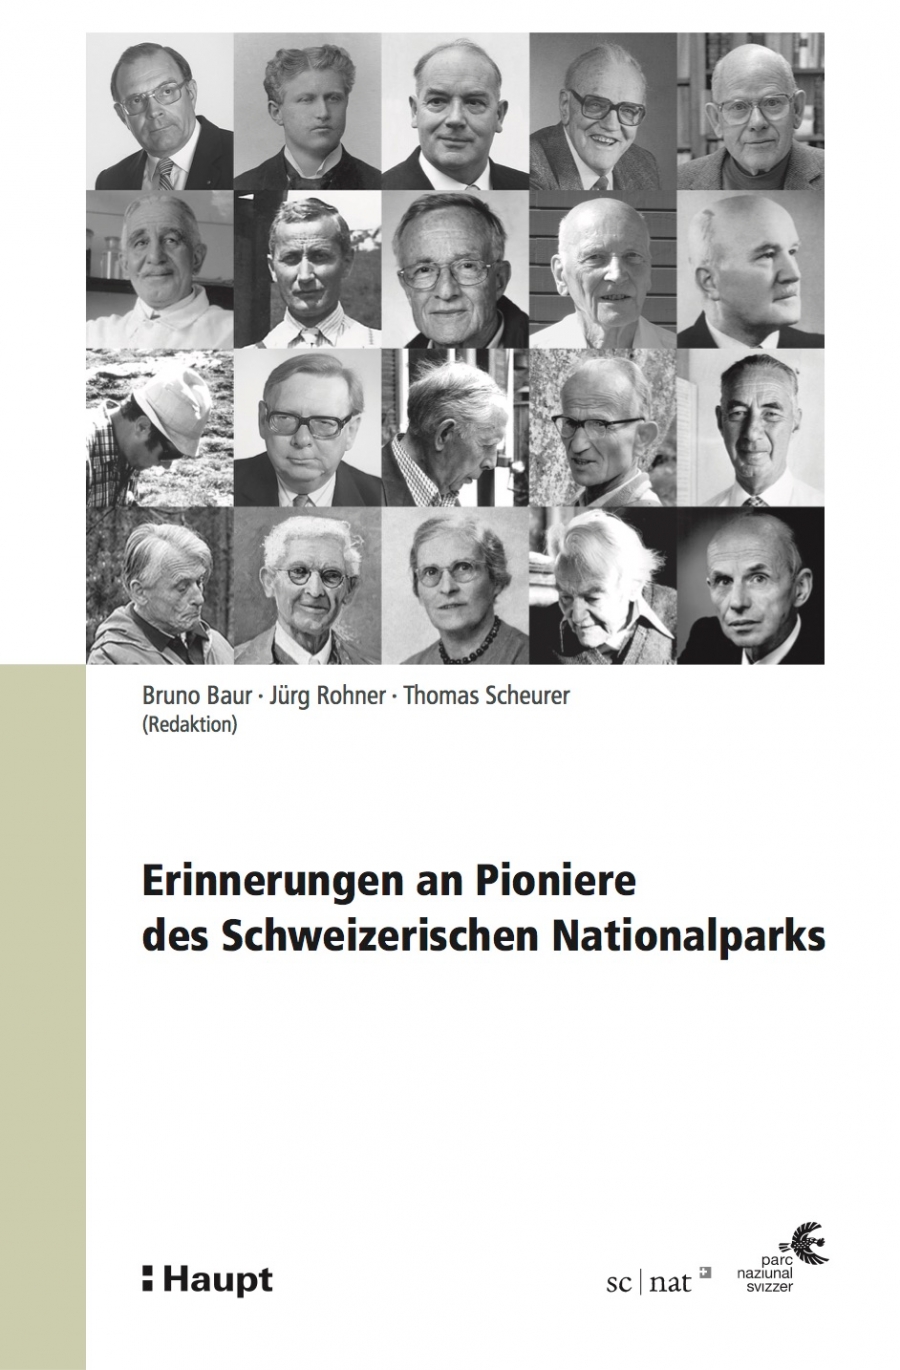 A new publication on the history of the Swiss National Park